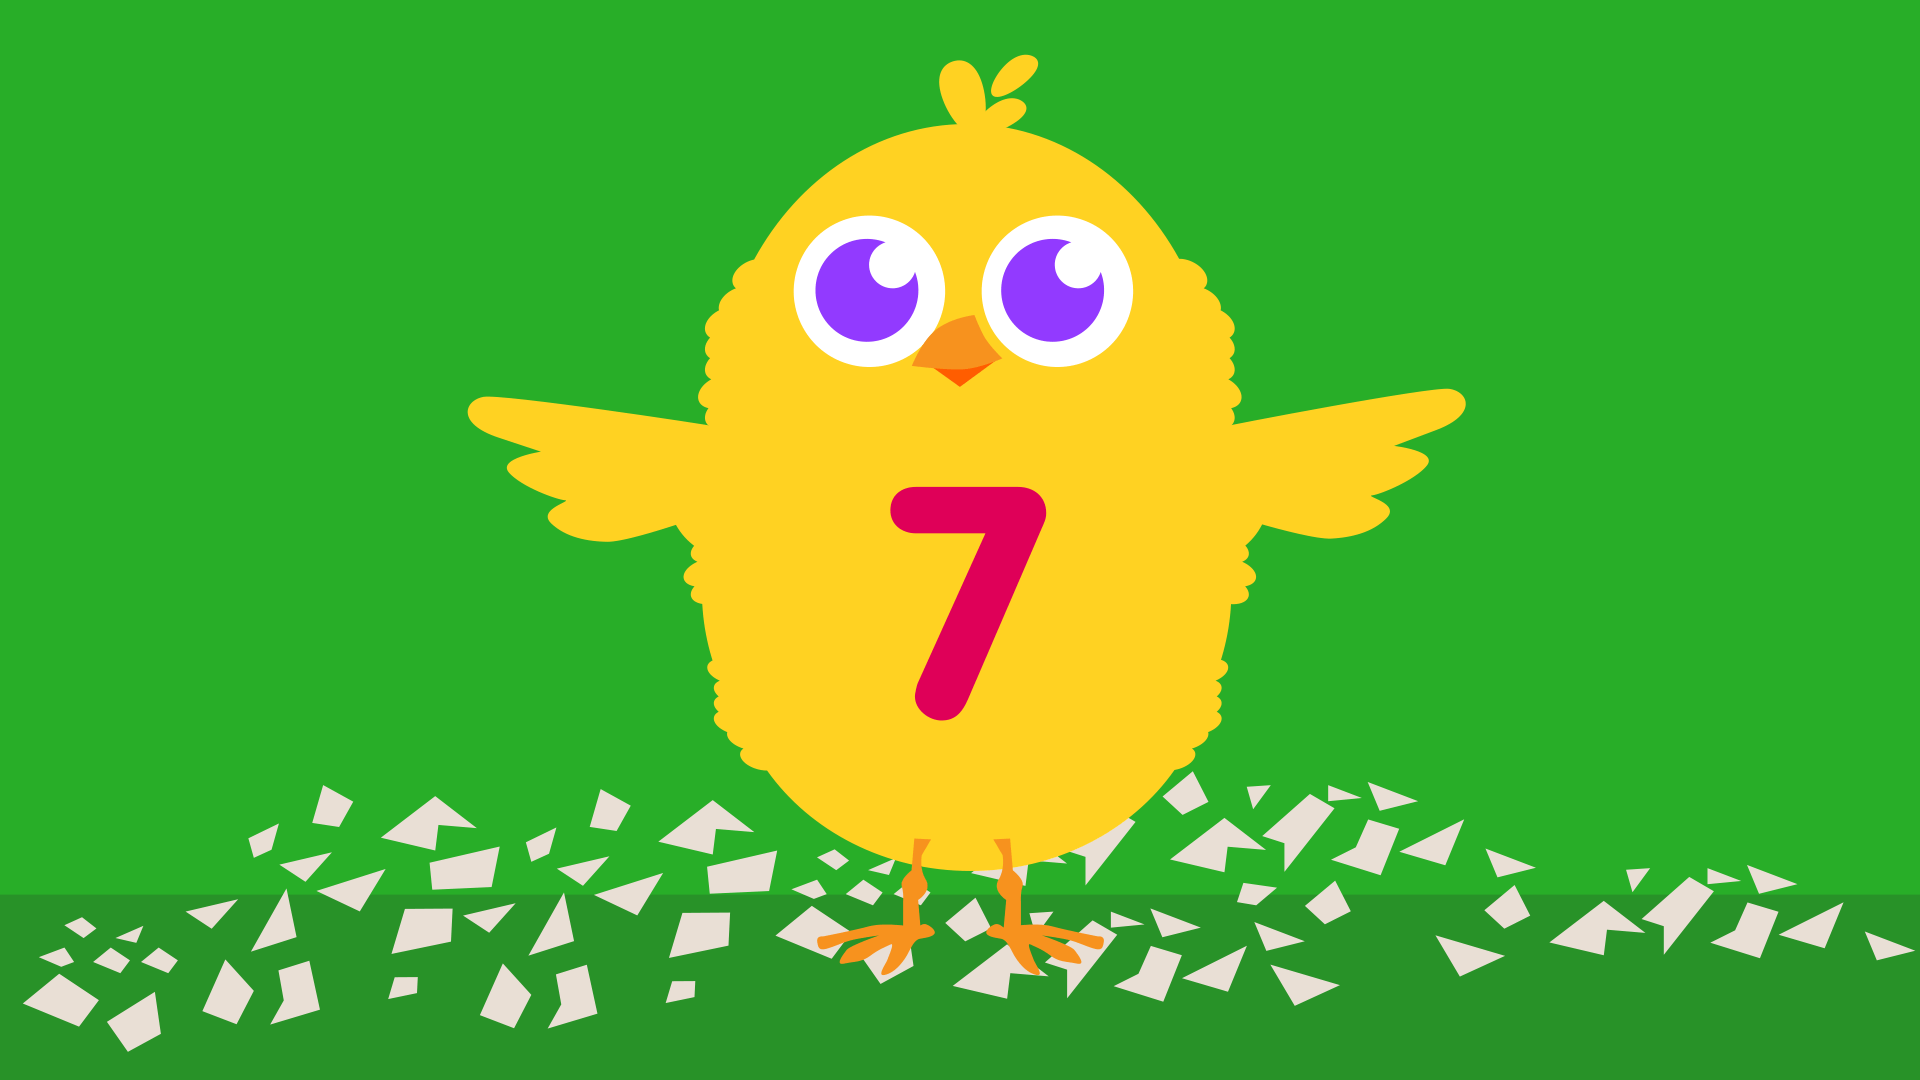 Yellow chick with 7 on its belly